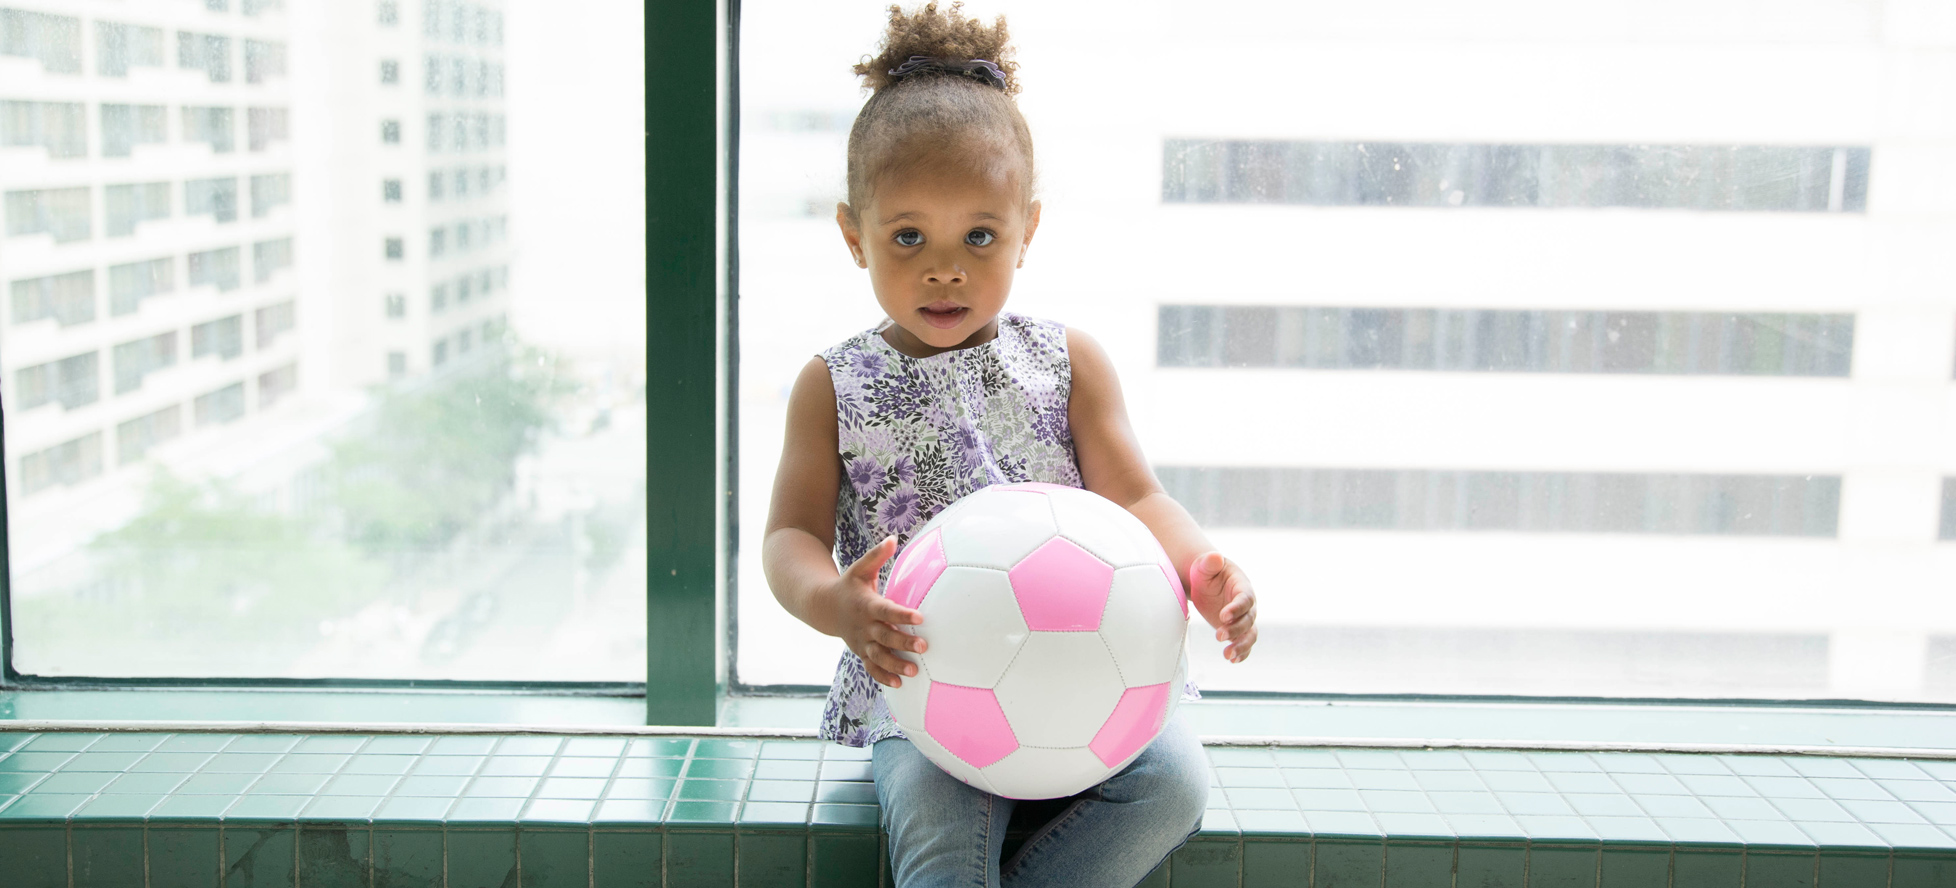 Girl sitting by window with pink soccer ball